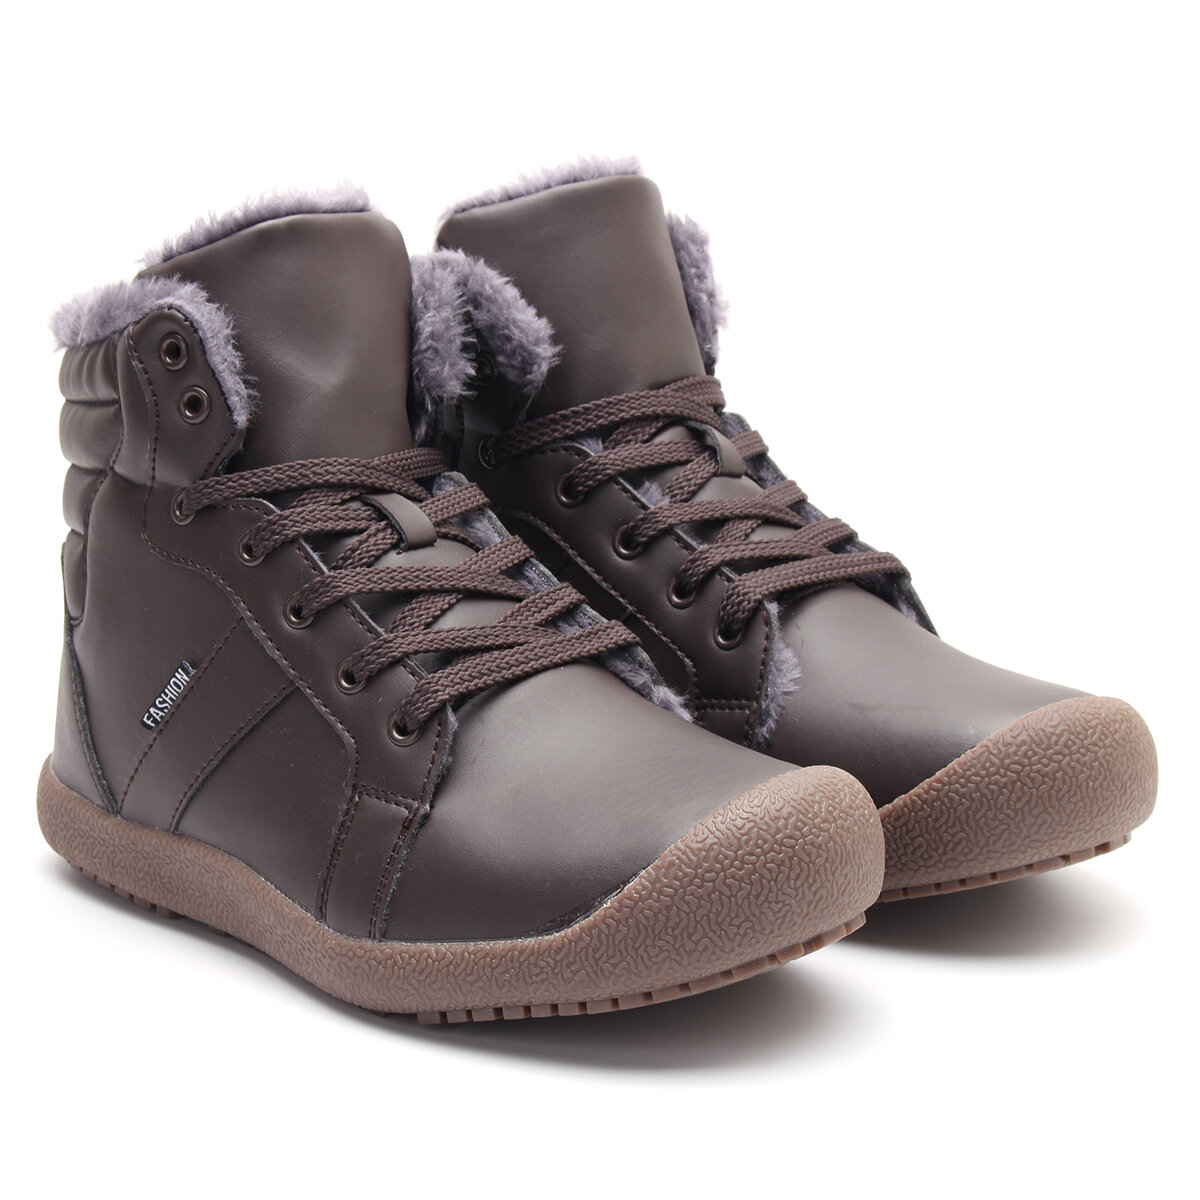 Men's Winter Warm Snow Boot Waterproof PU High Top Lace Up Comfy...